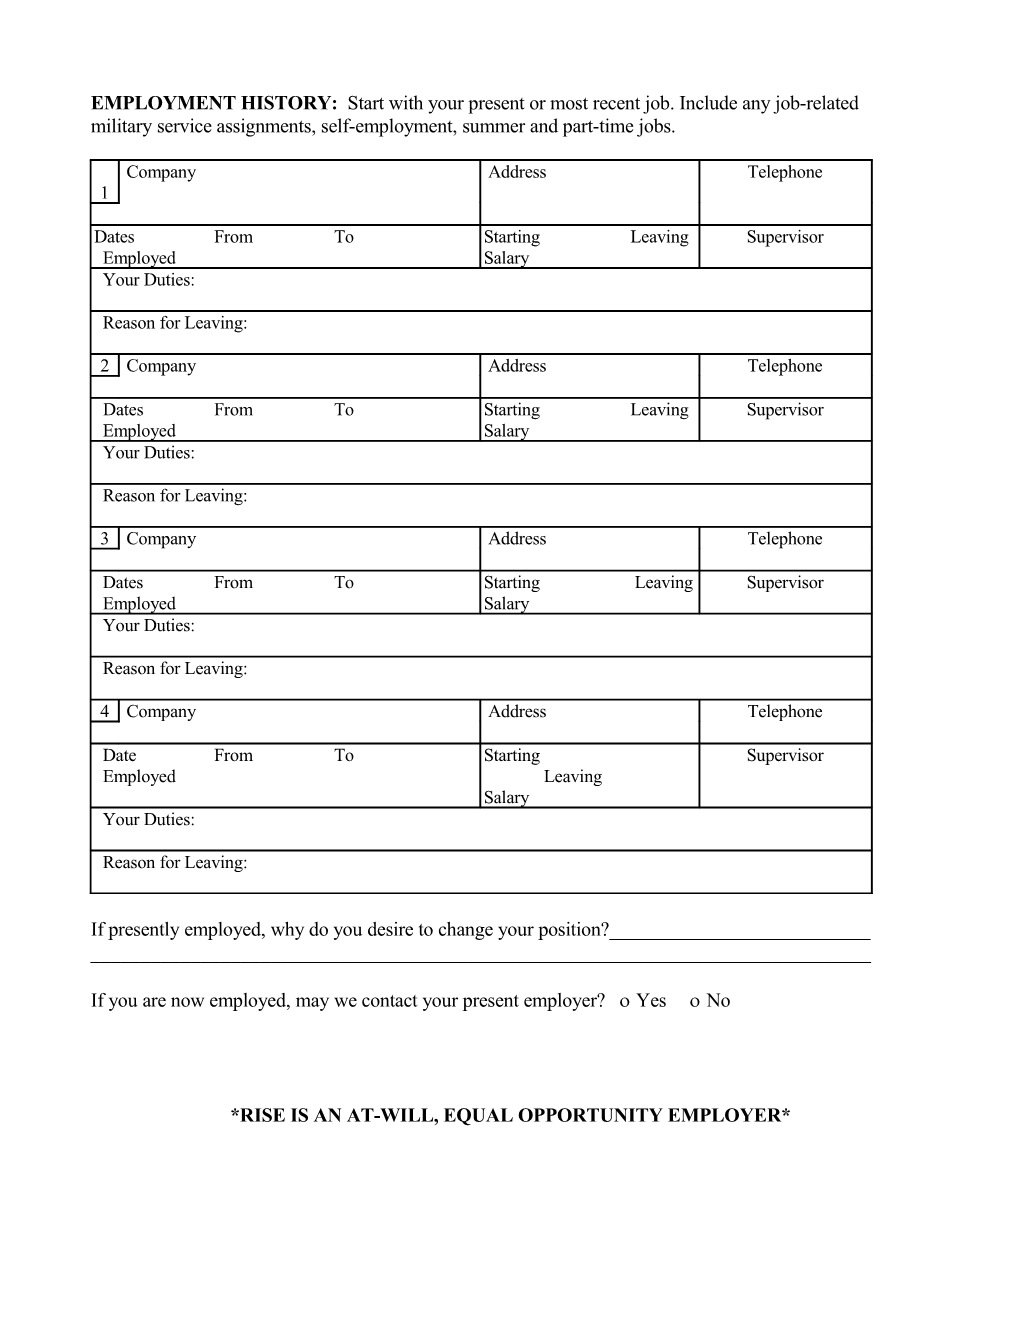 At-Will Employment Application